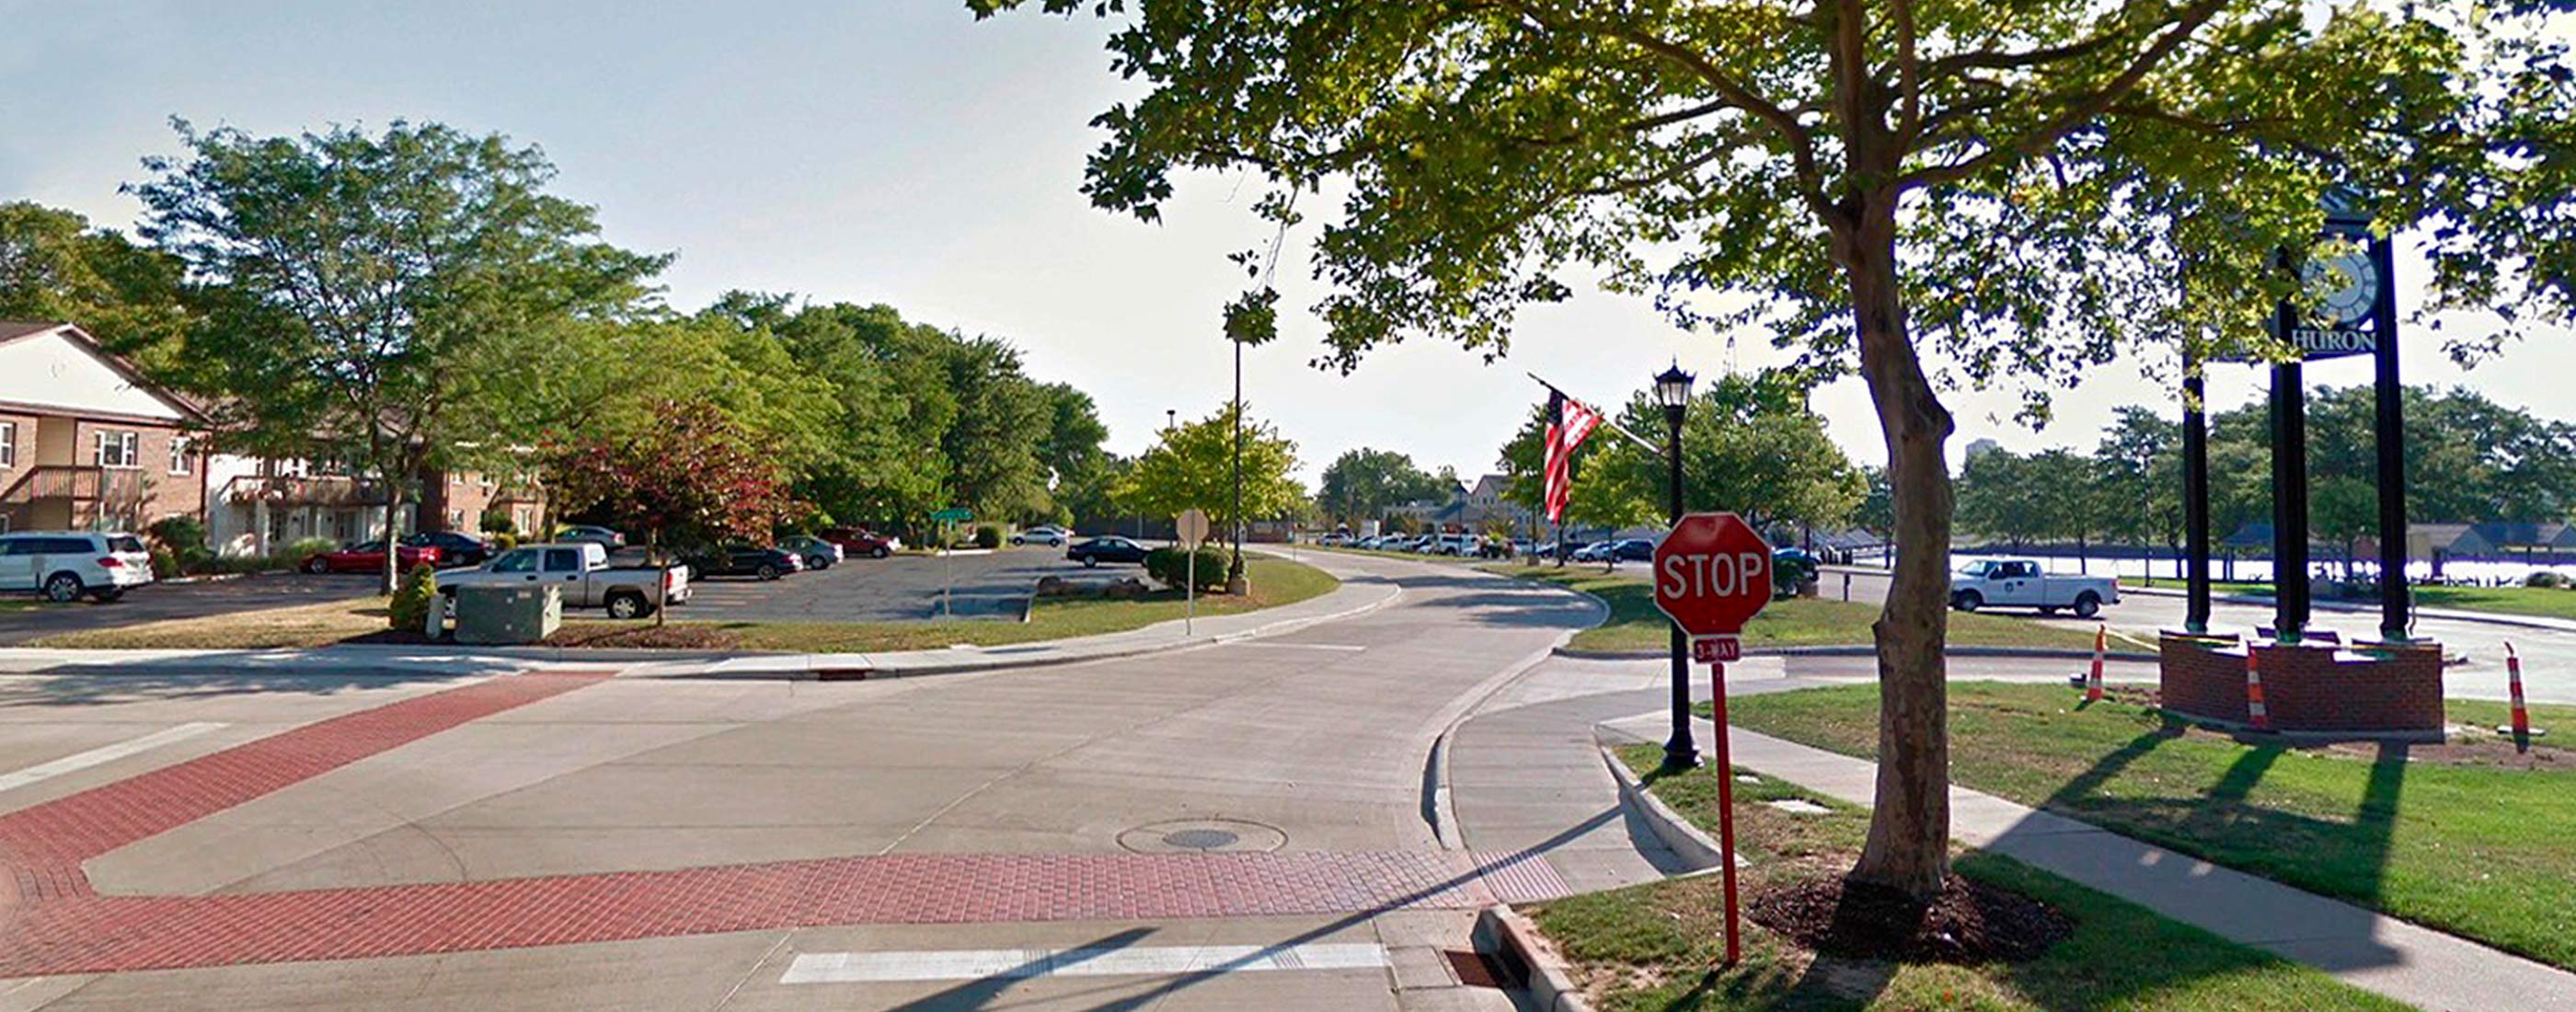 Huron, Ohio’s updated streetscape by OHM Advisors includes new traffic signage.